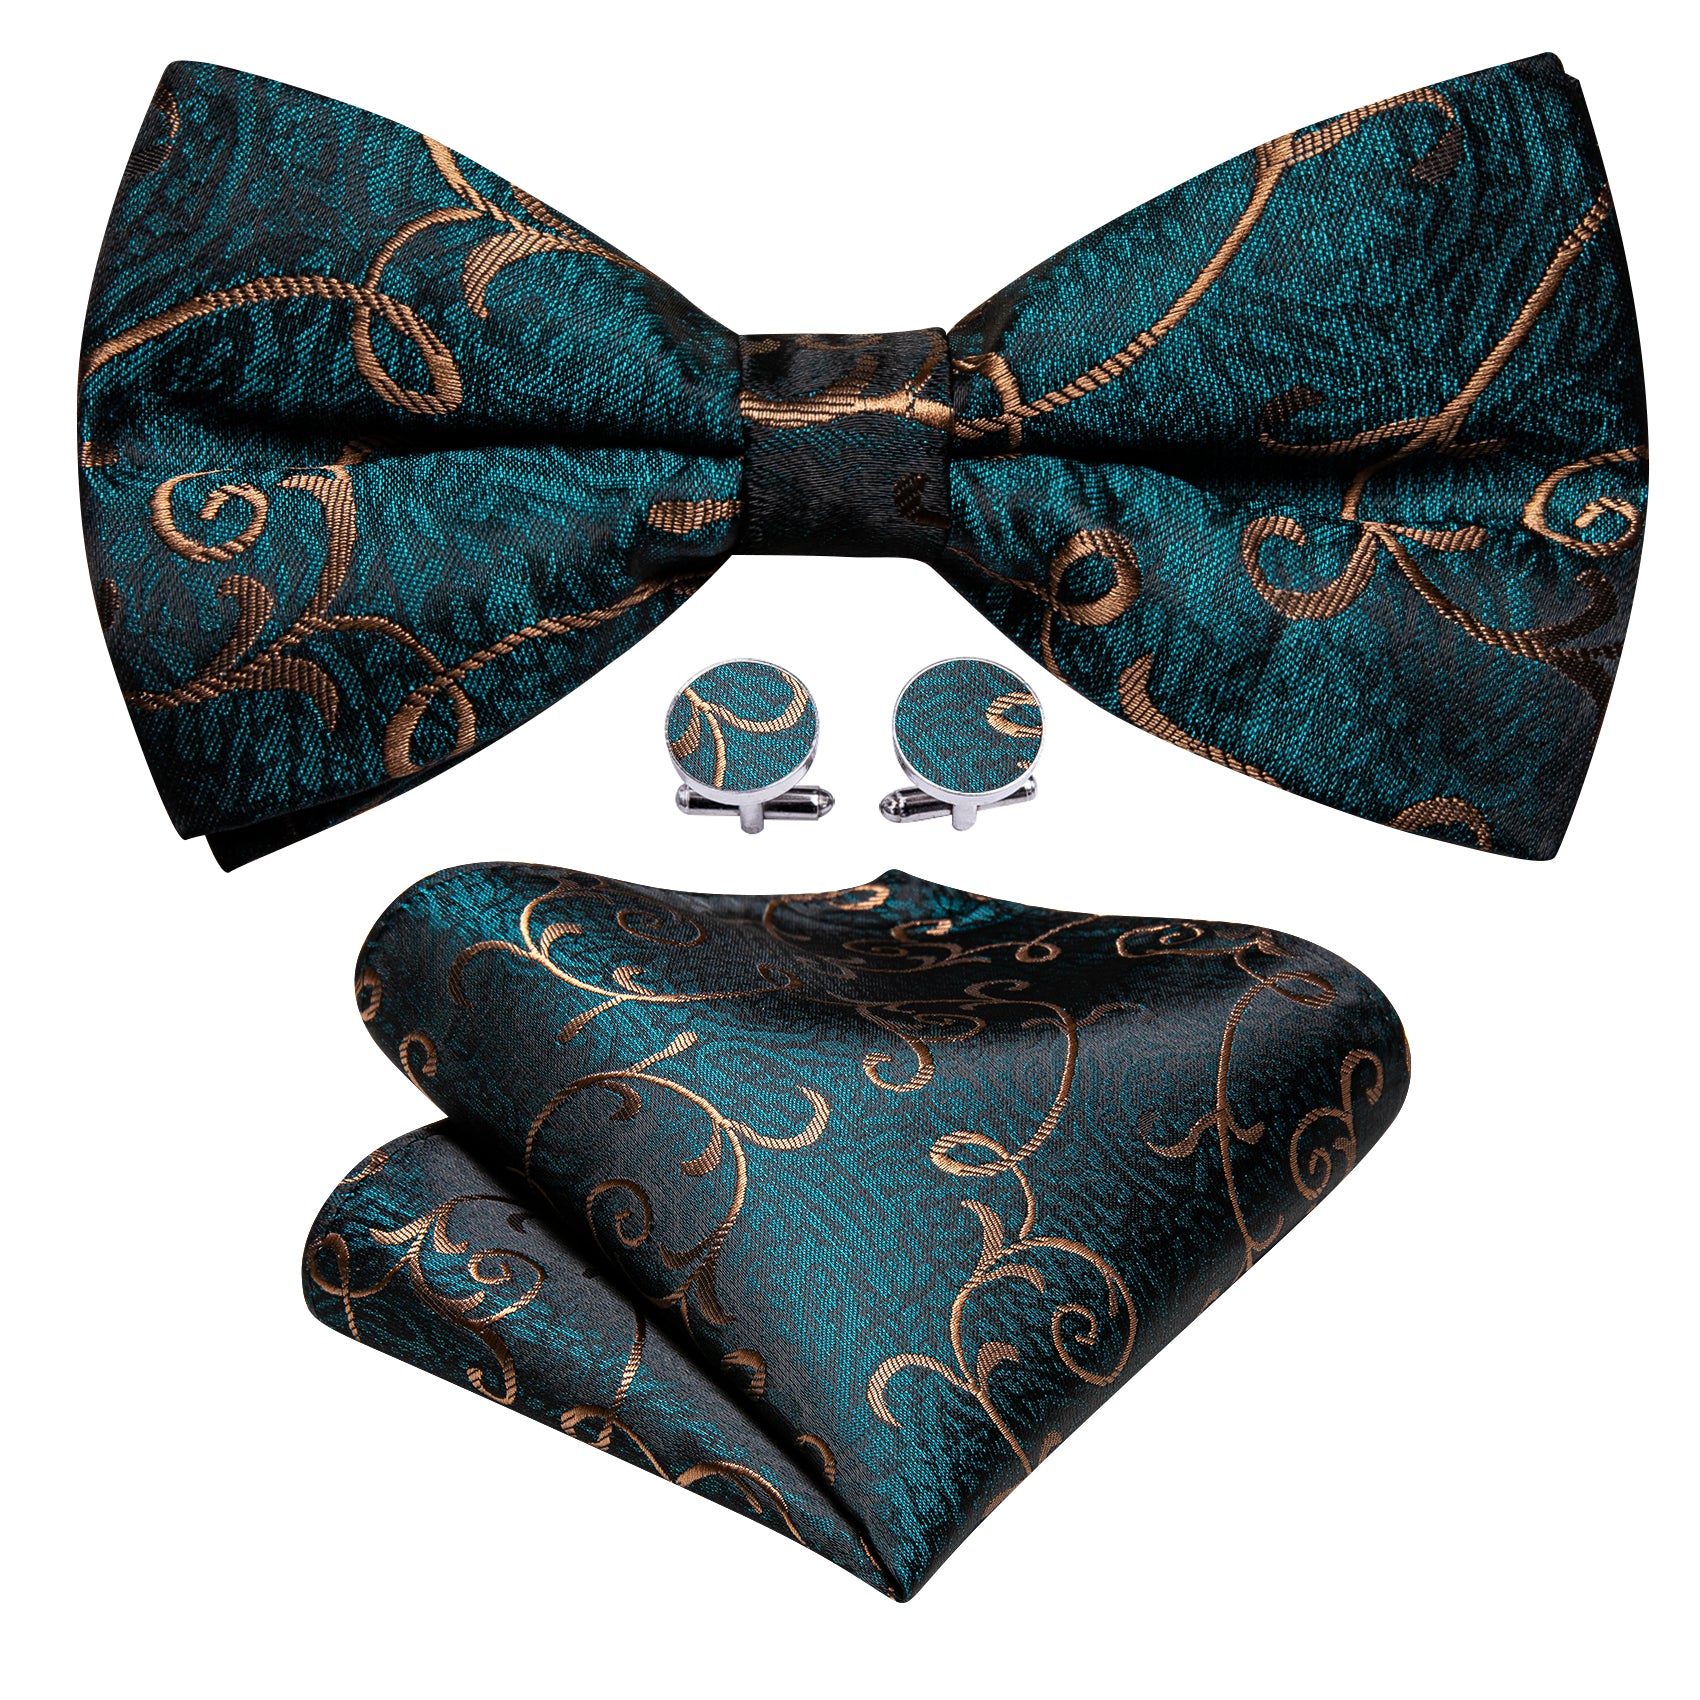 Barry.wang Blue Tie Gold Jacquard Floral Pre-tied Bow Tie Formal